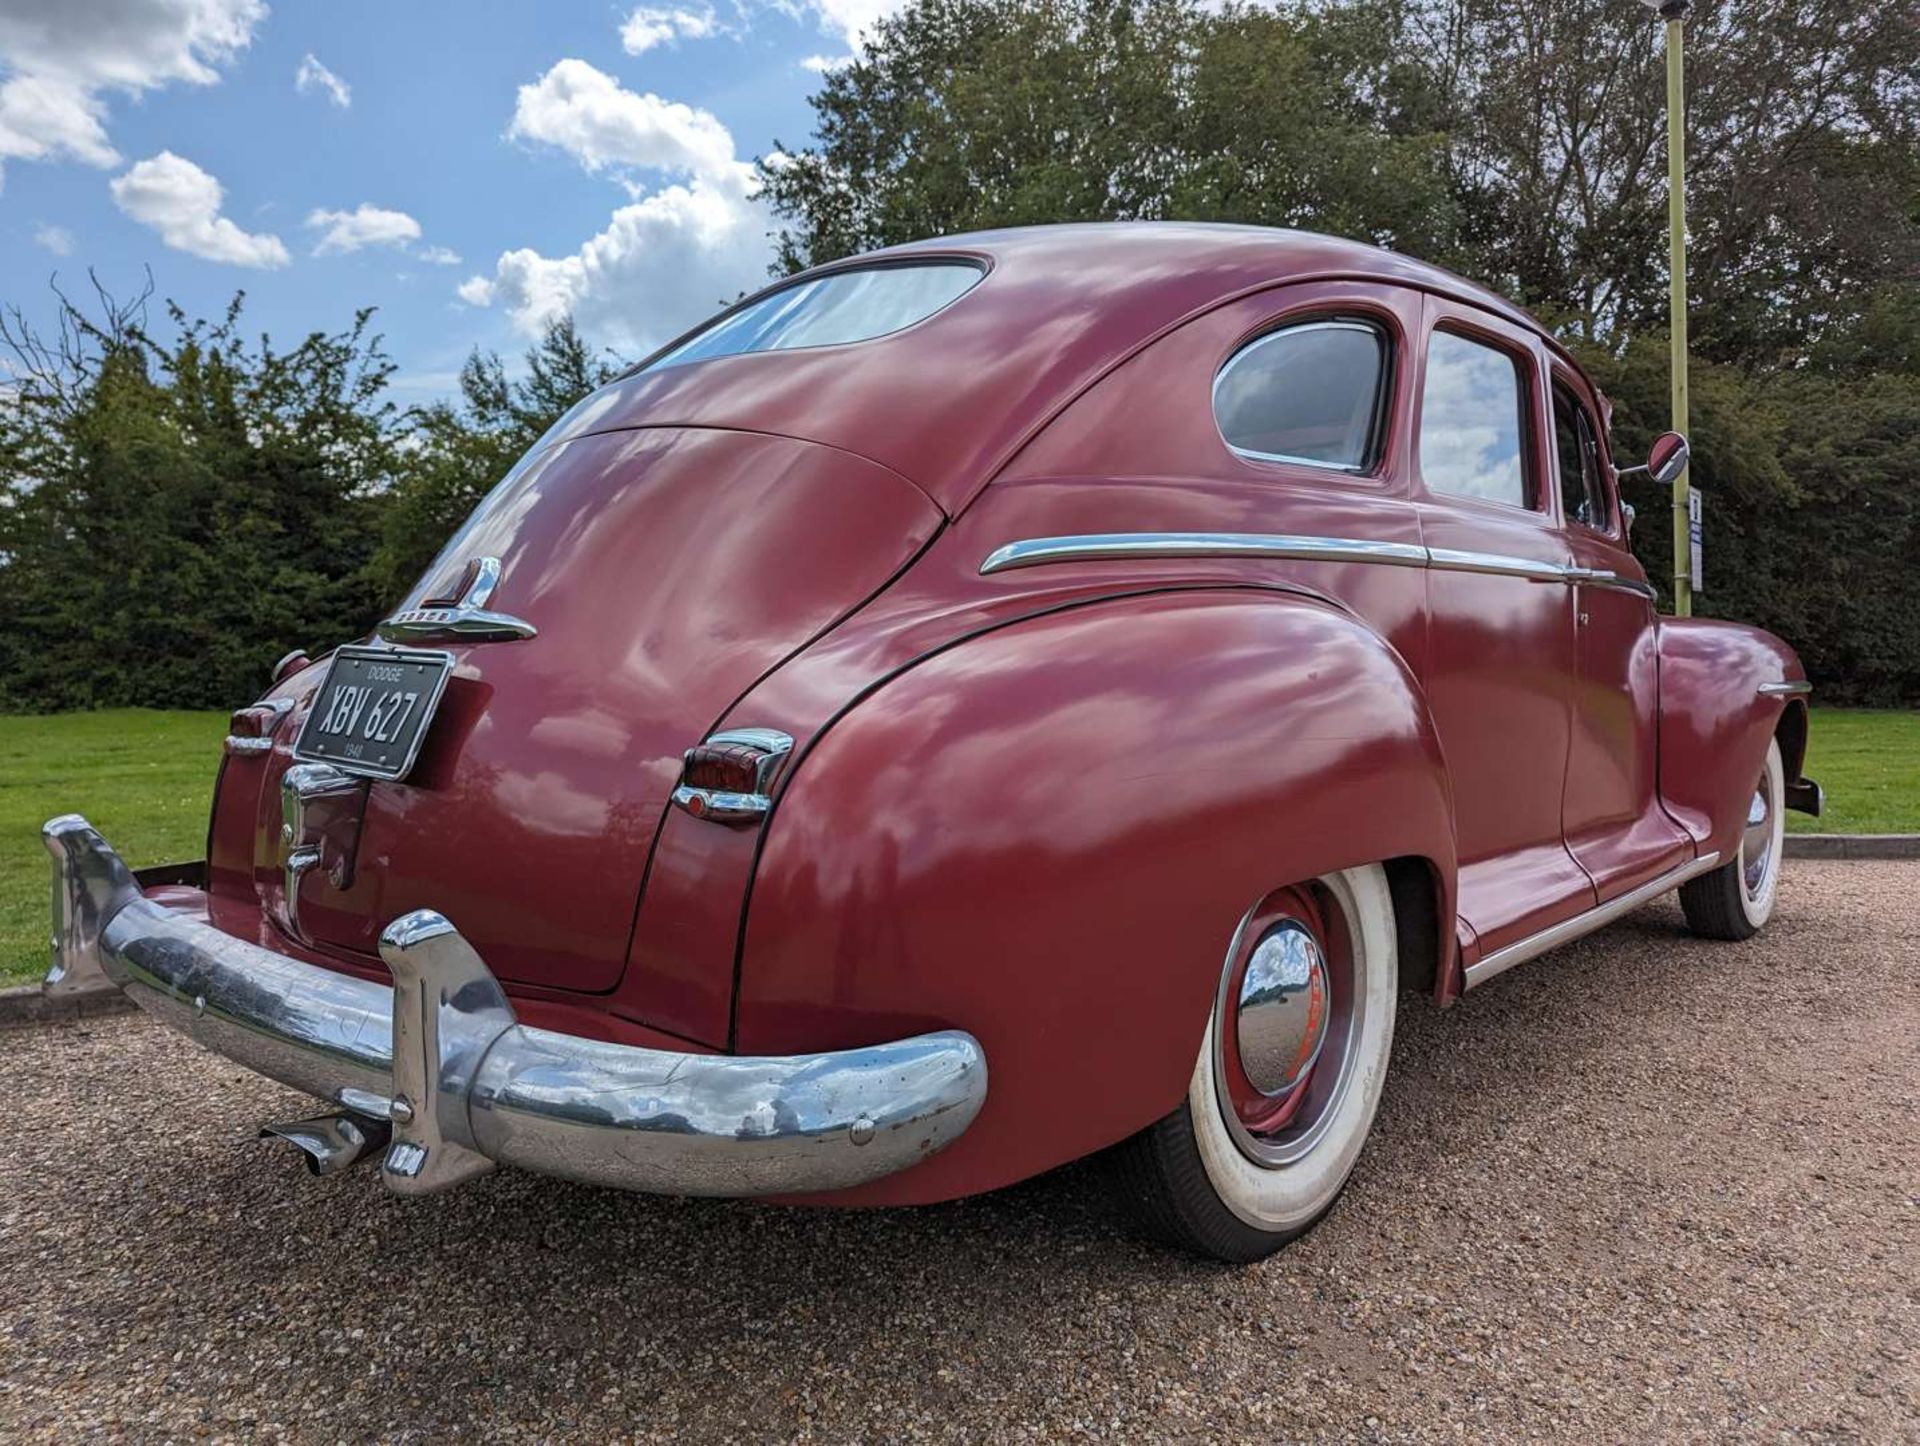 1947 DODGE SPECIAL DELUXE LHD - Image 10 of 30